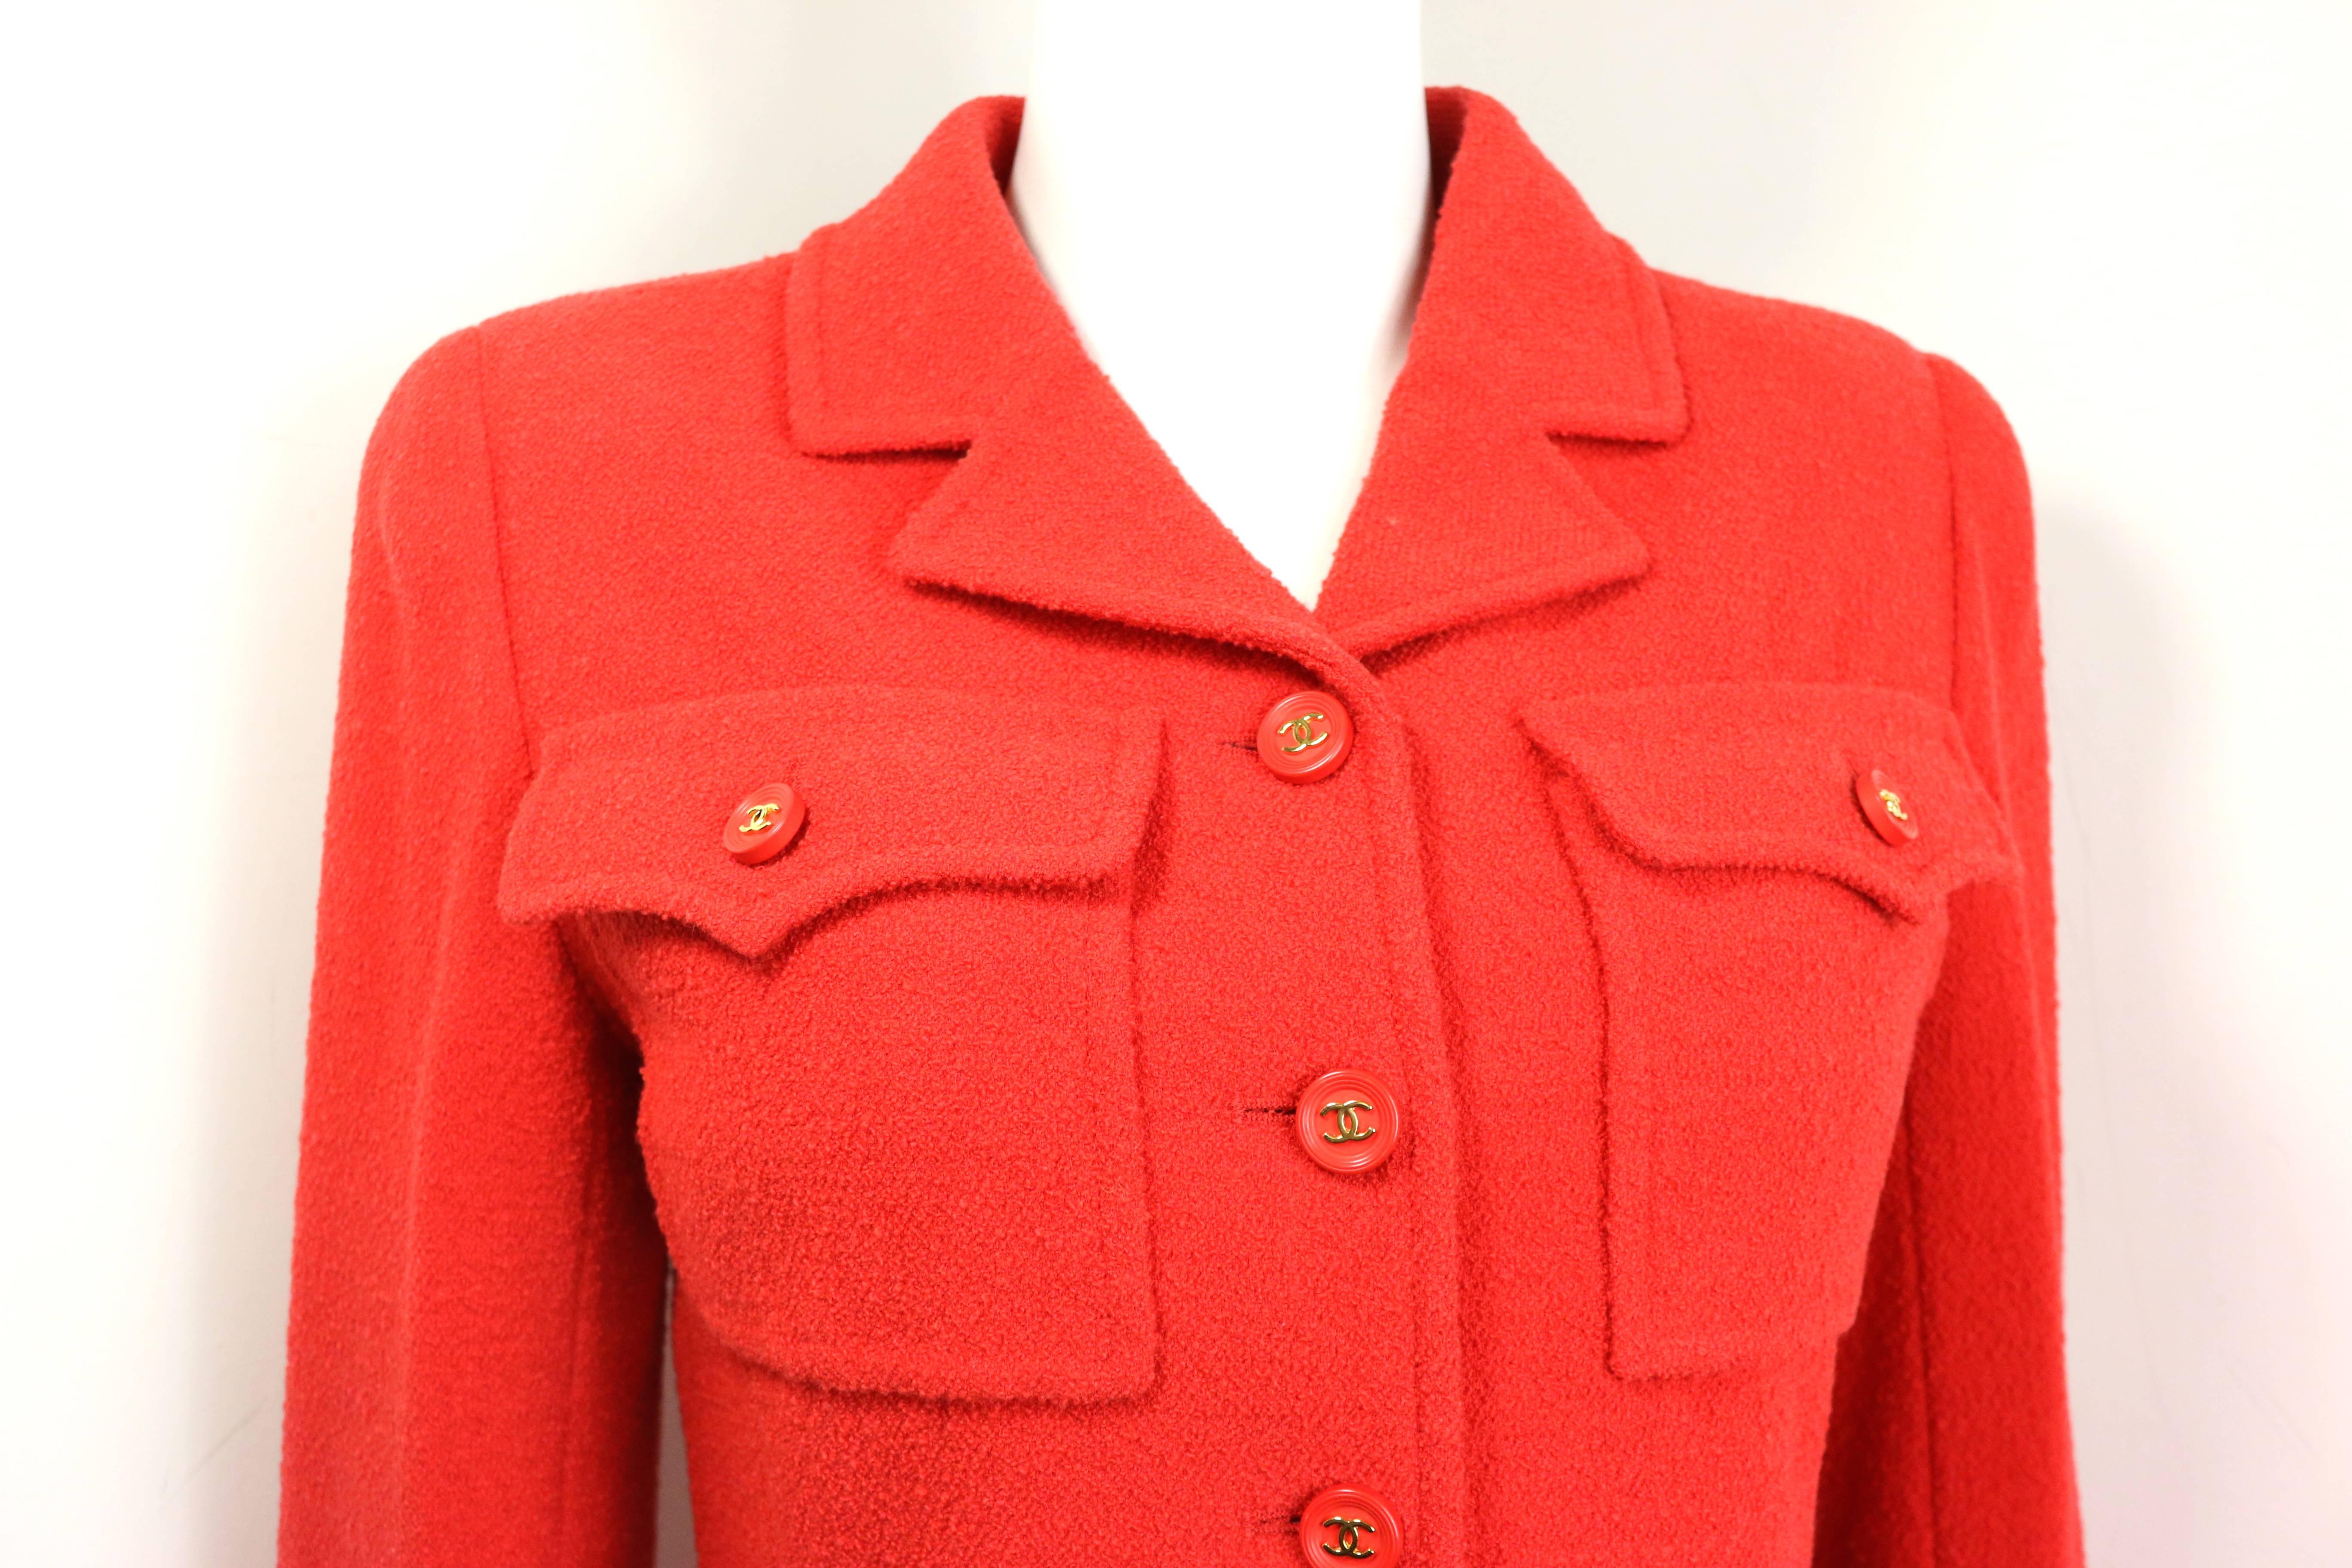 - Vintage Chanel red wool jacket from 1995 A/W collection. 

- Two front flap pockets with gold toned 